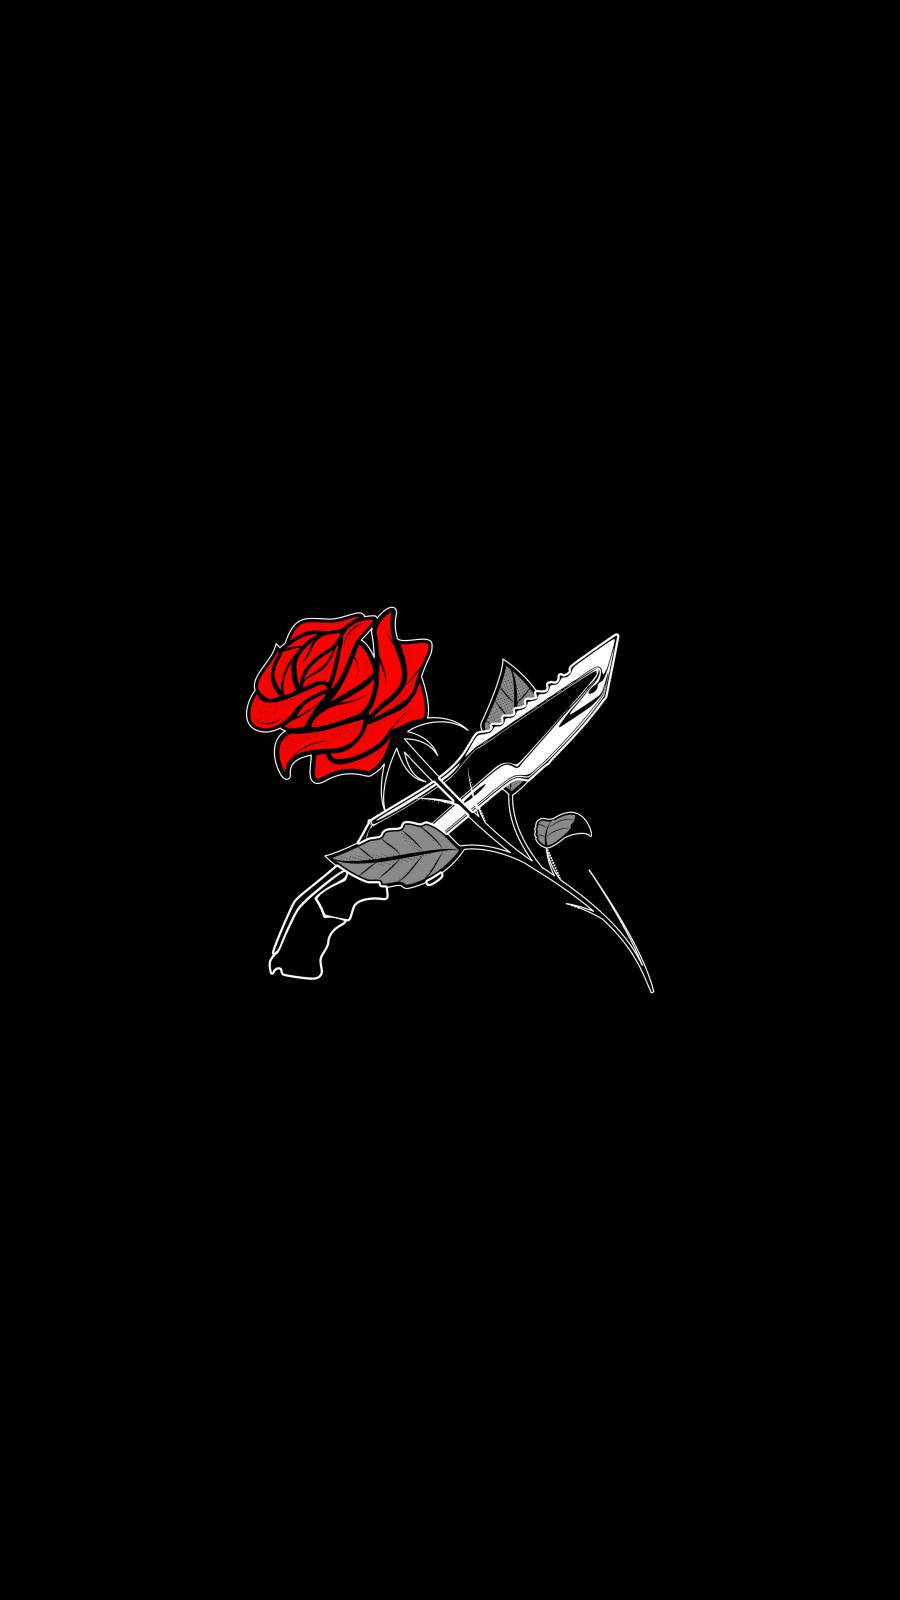 Knife and Rose